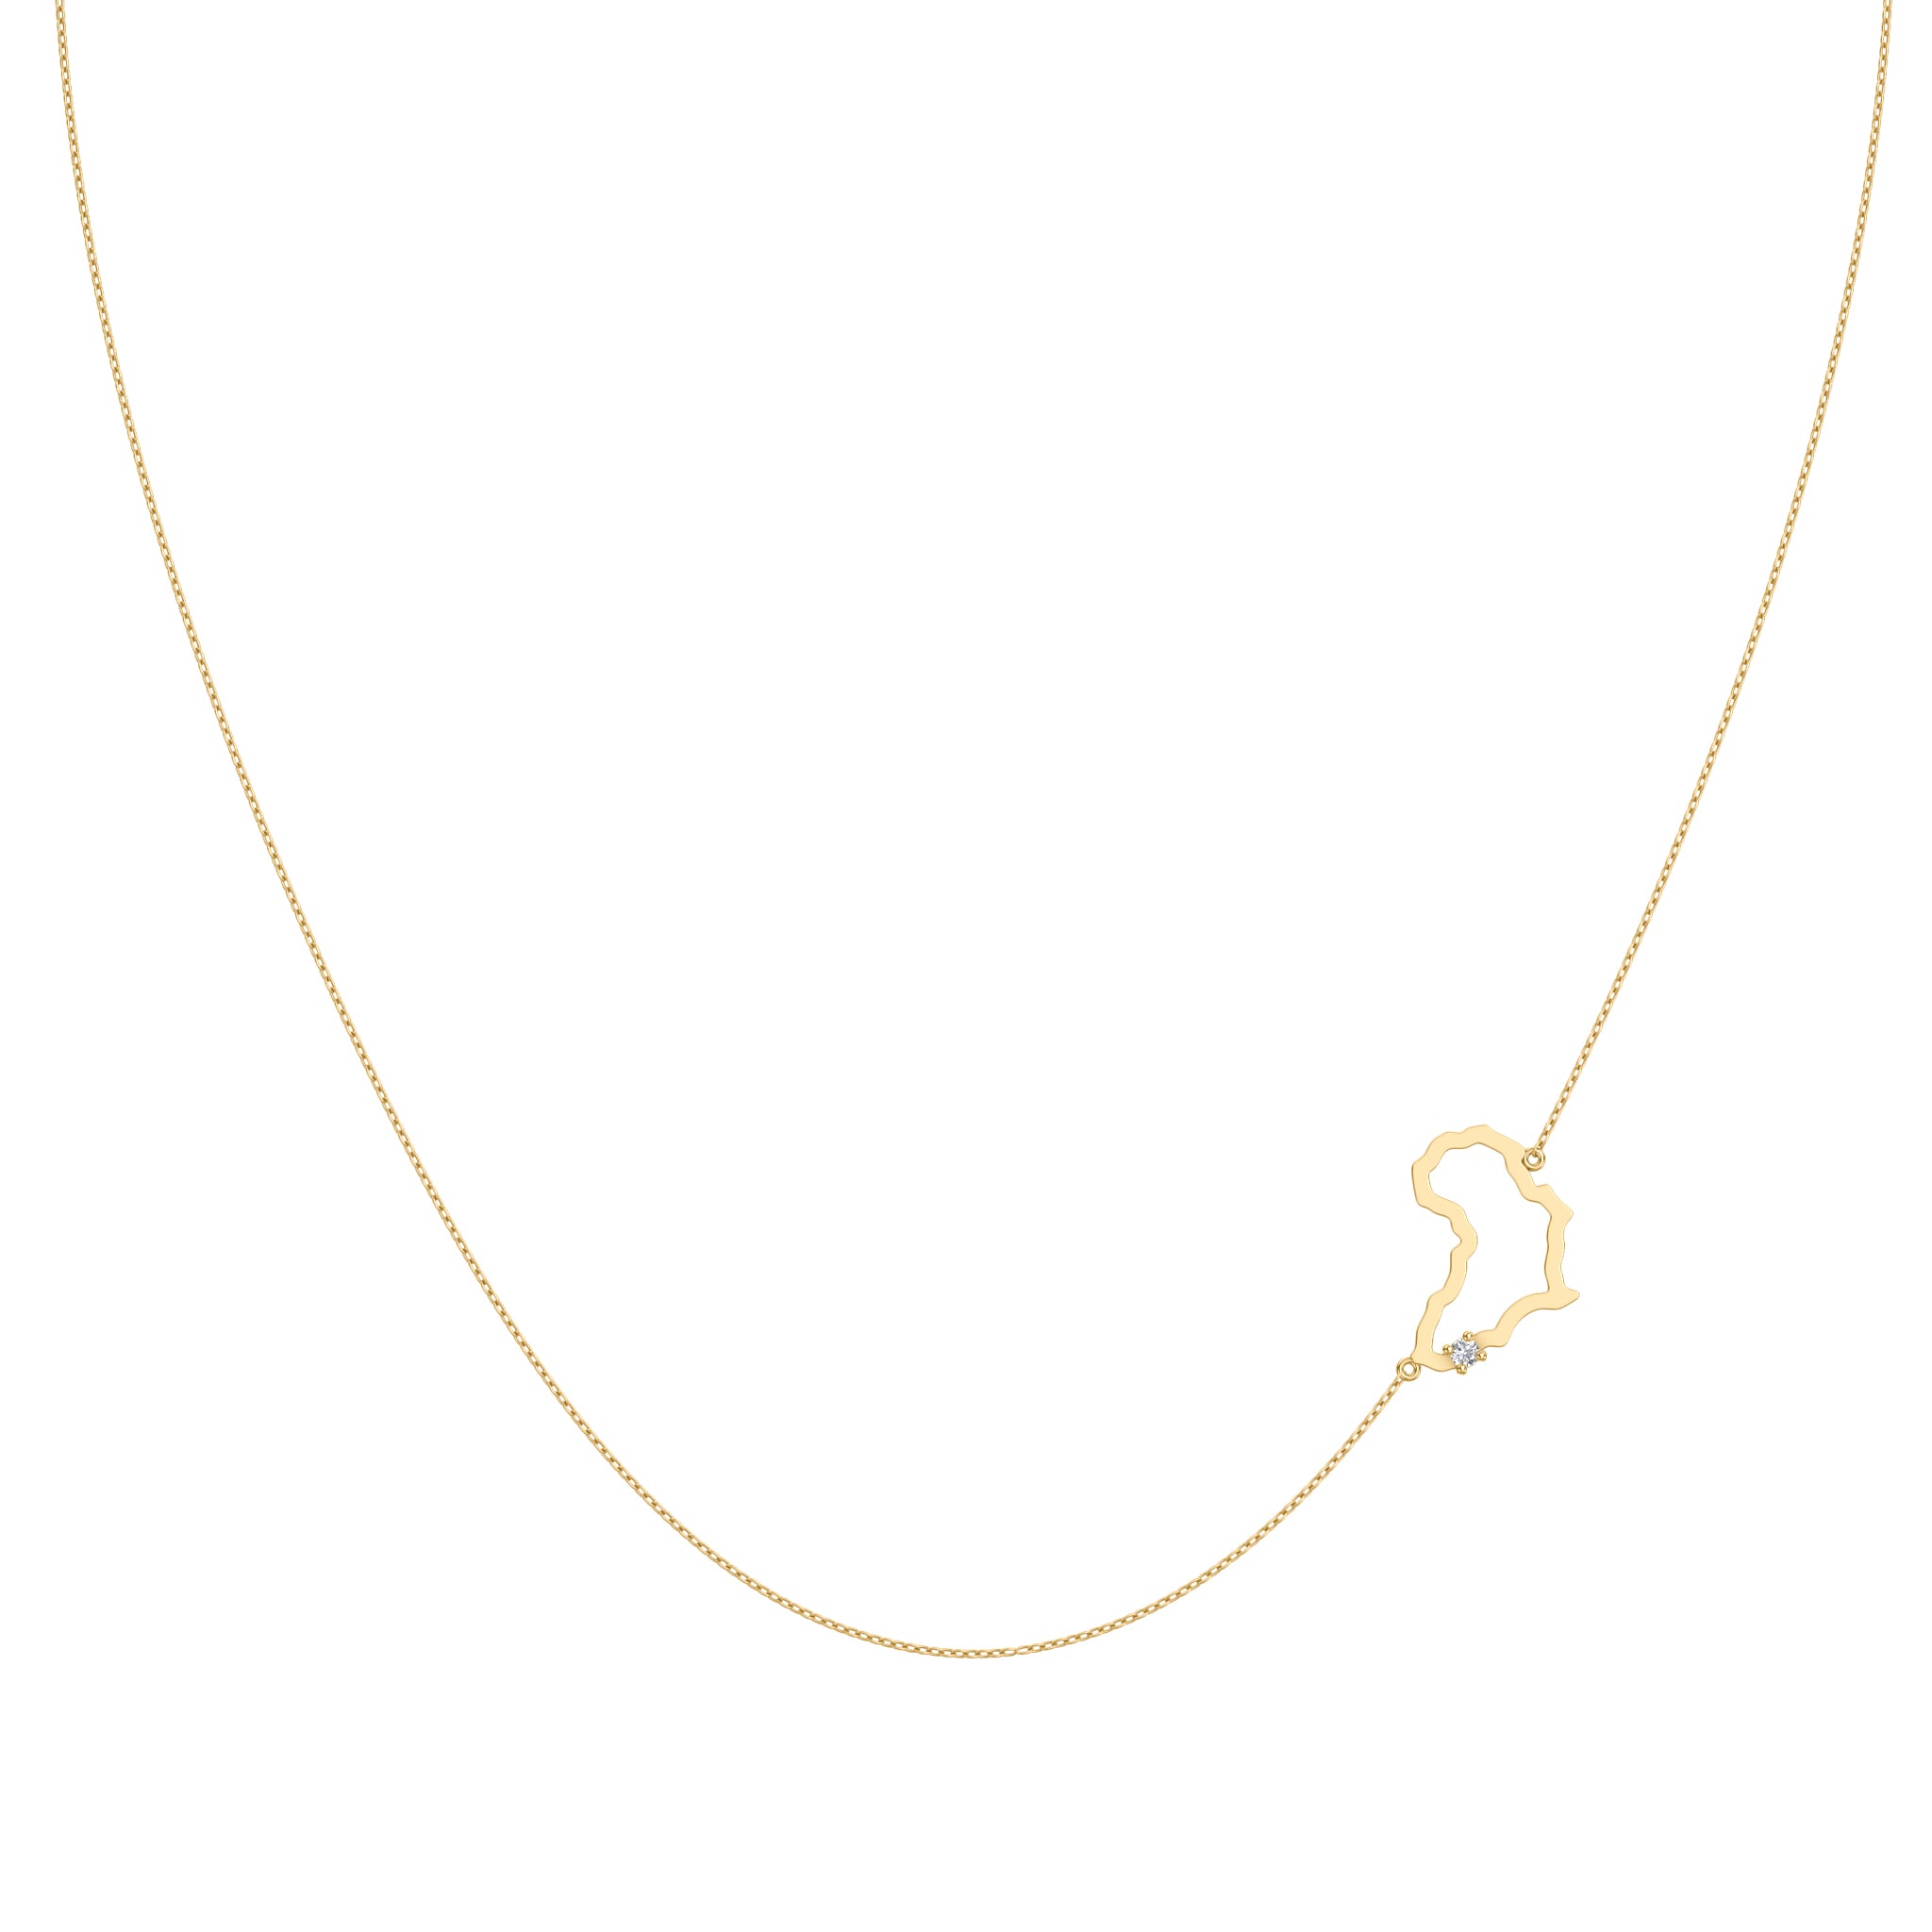 Shimansky - My Africa Diamond Necklace Crafted in 14K Yellow Gold